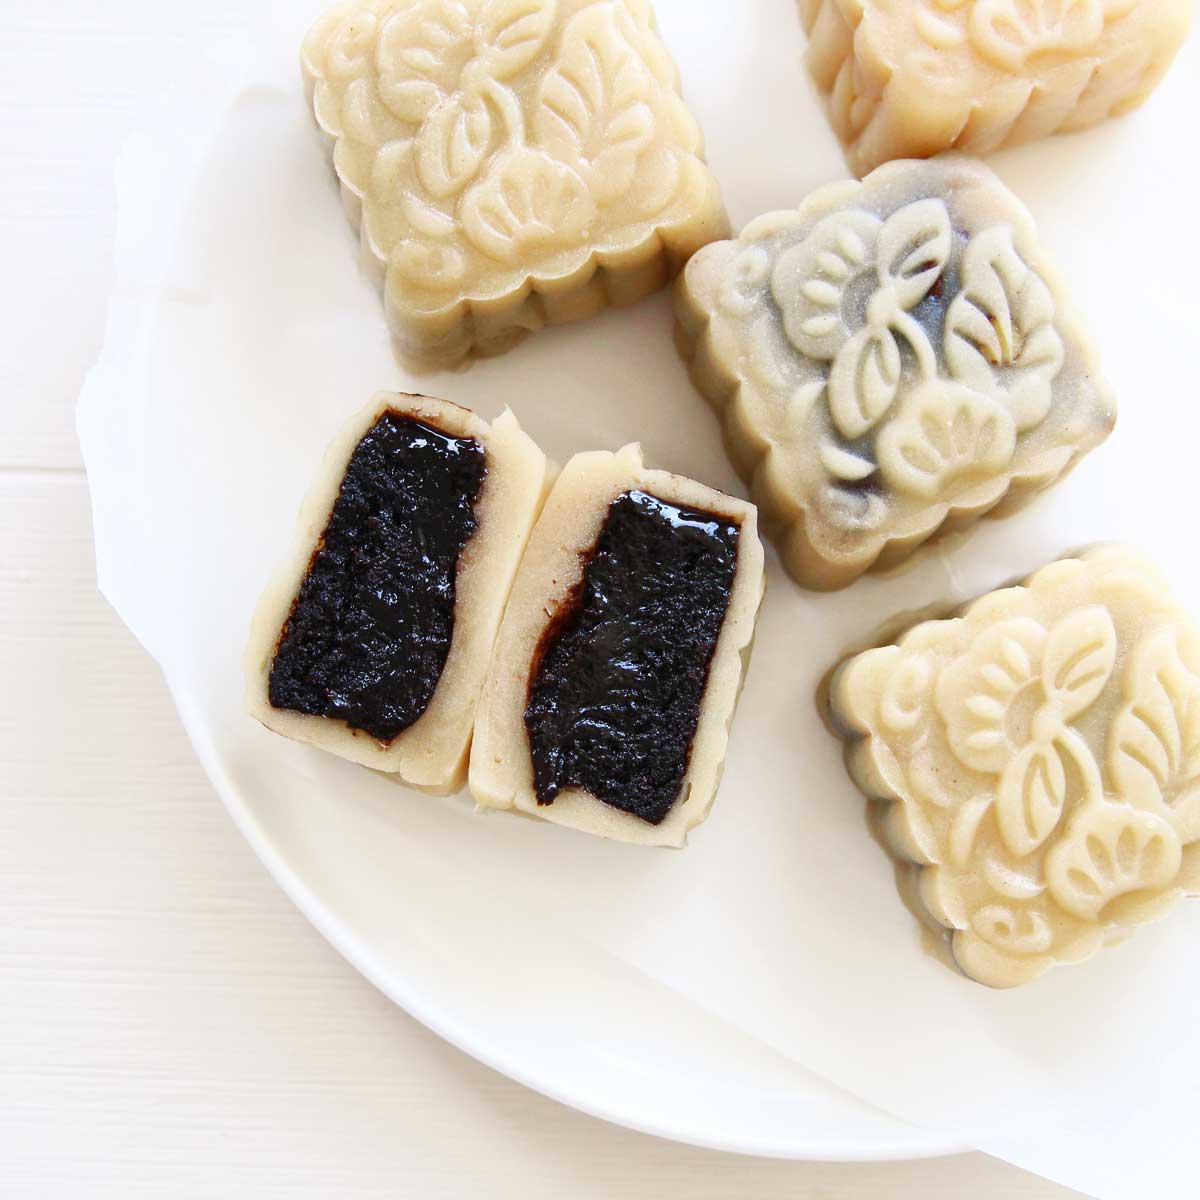 Peanut Butter Snow Skin Mooncakes with Brownie FIlling - Walnut Butter Mooncakes